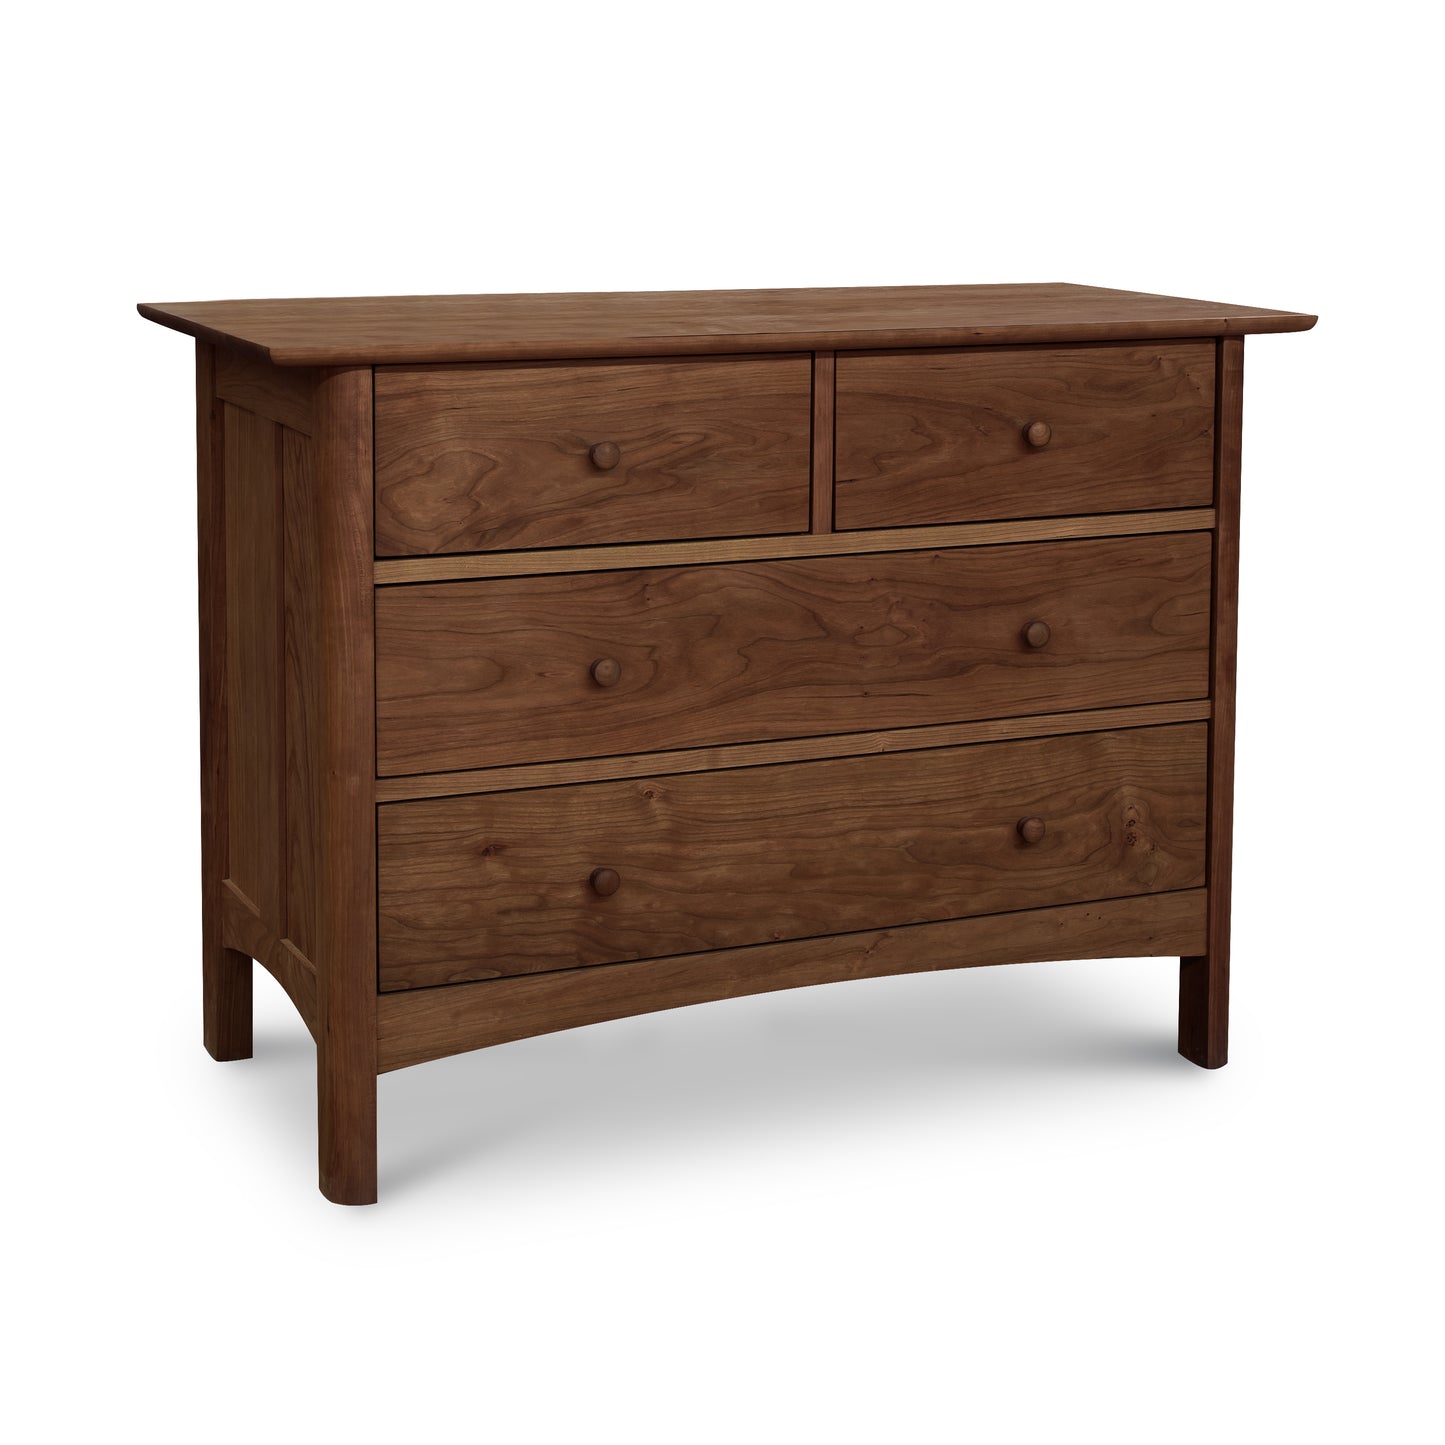 A Heartwood Shaker 4-Drawer Dresser by Vermont Furniture Designs, isolated on a white background.